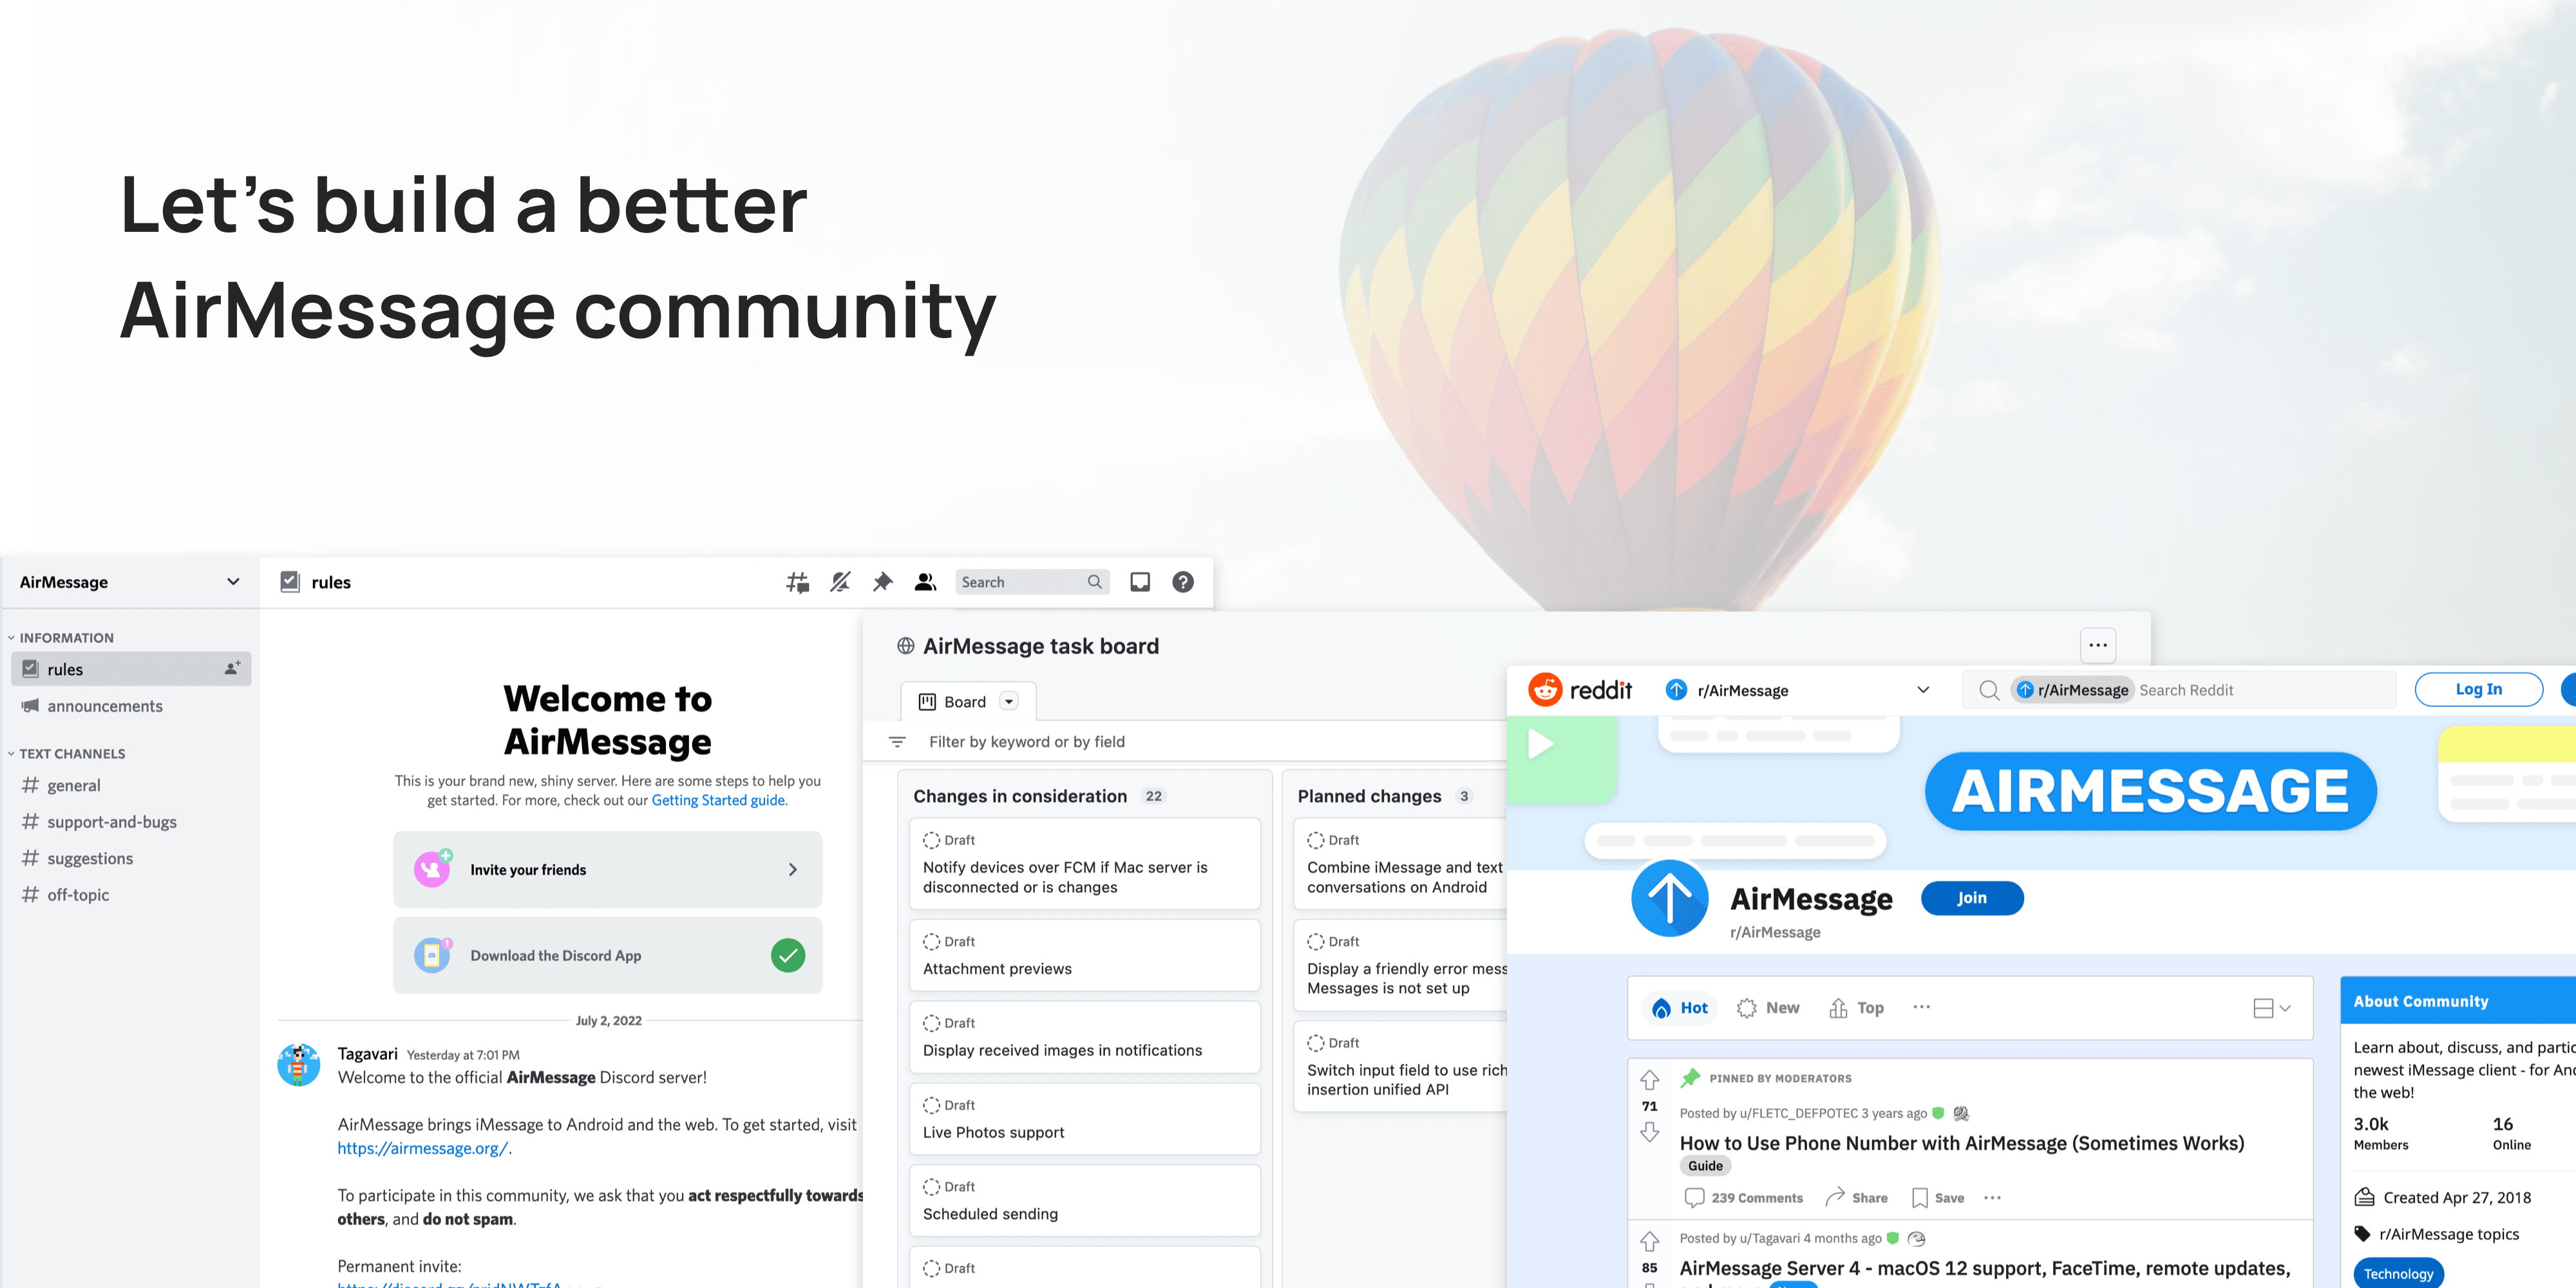 Screenshots of AirMessage's public community pages